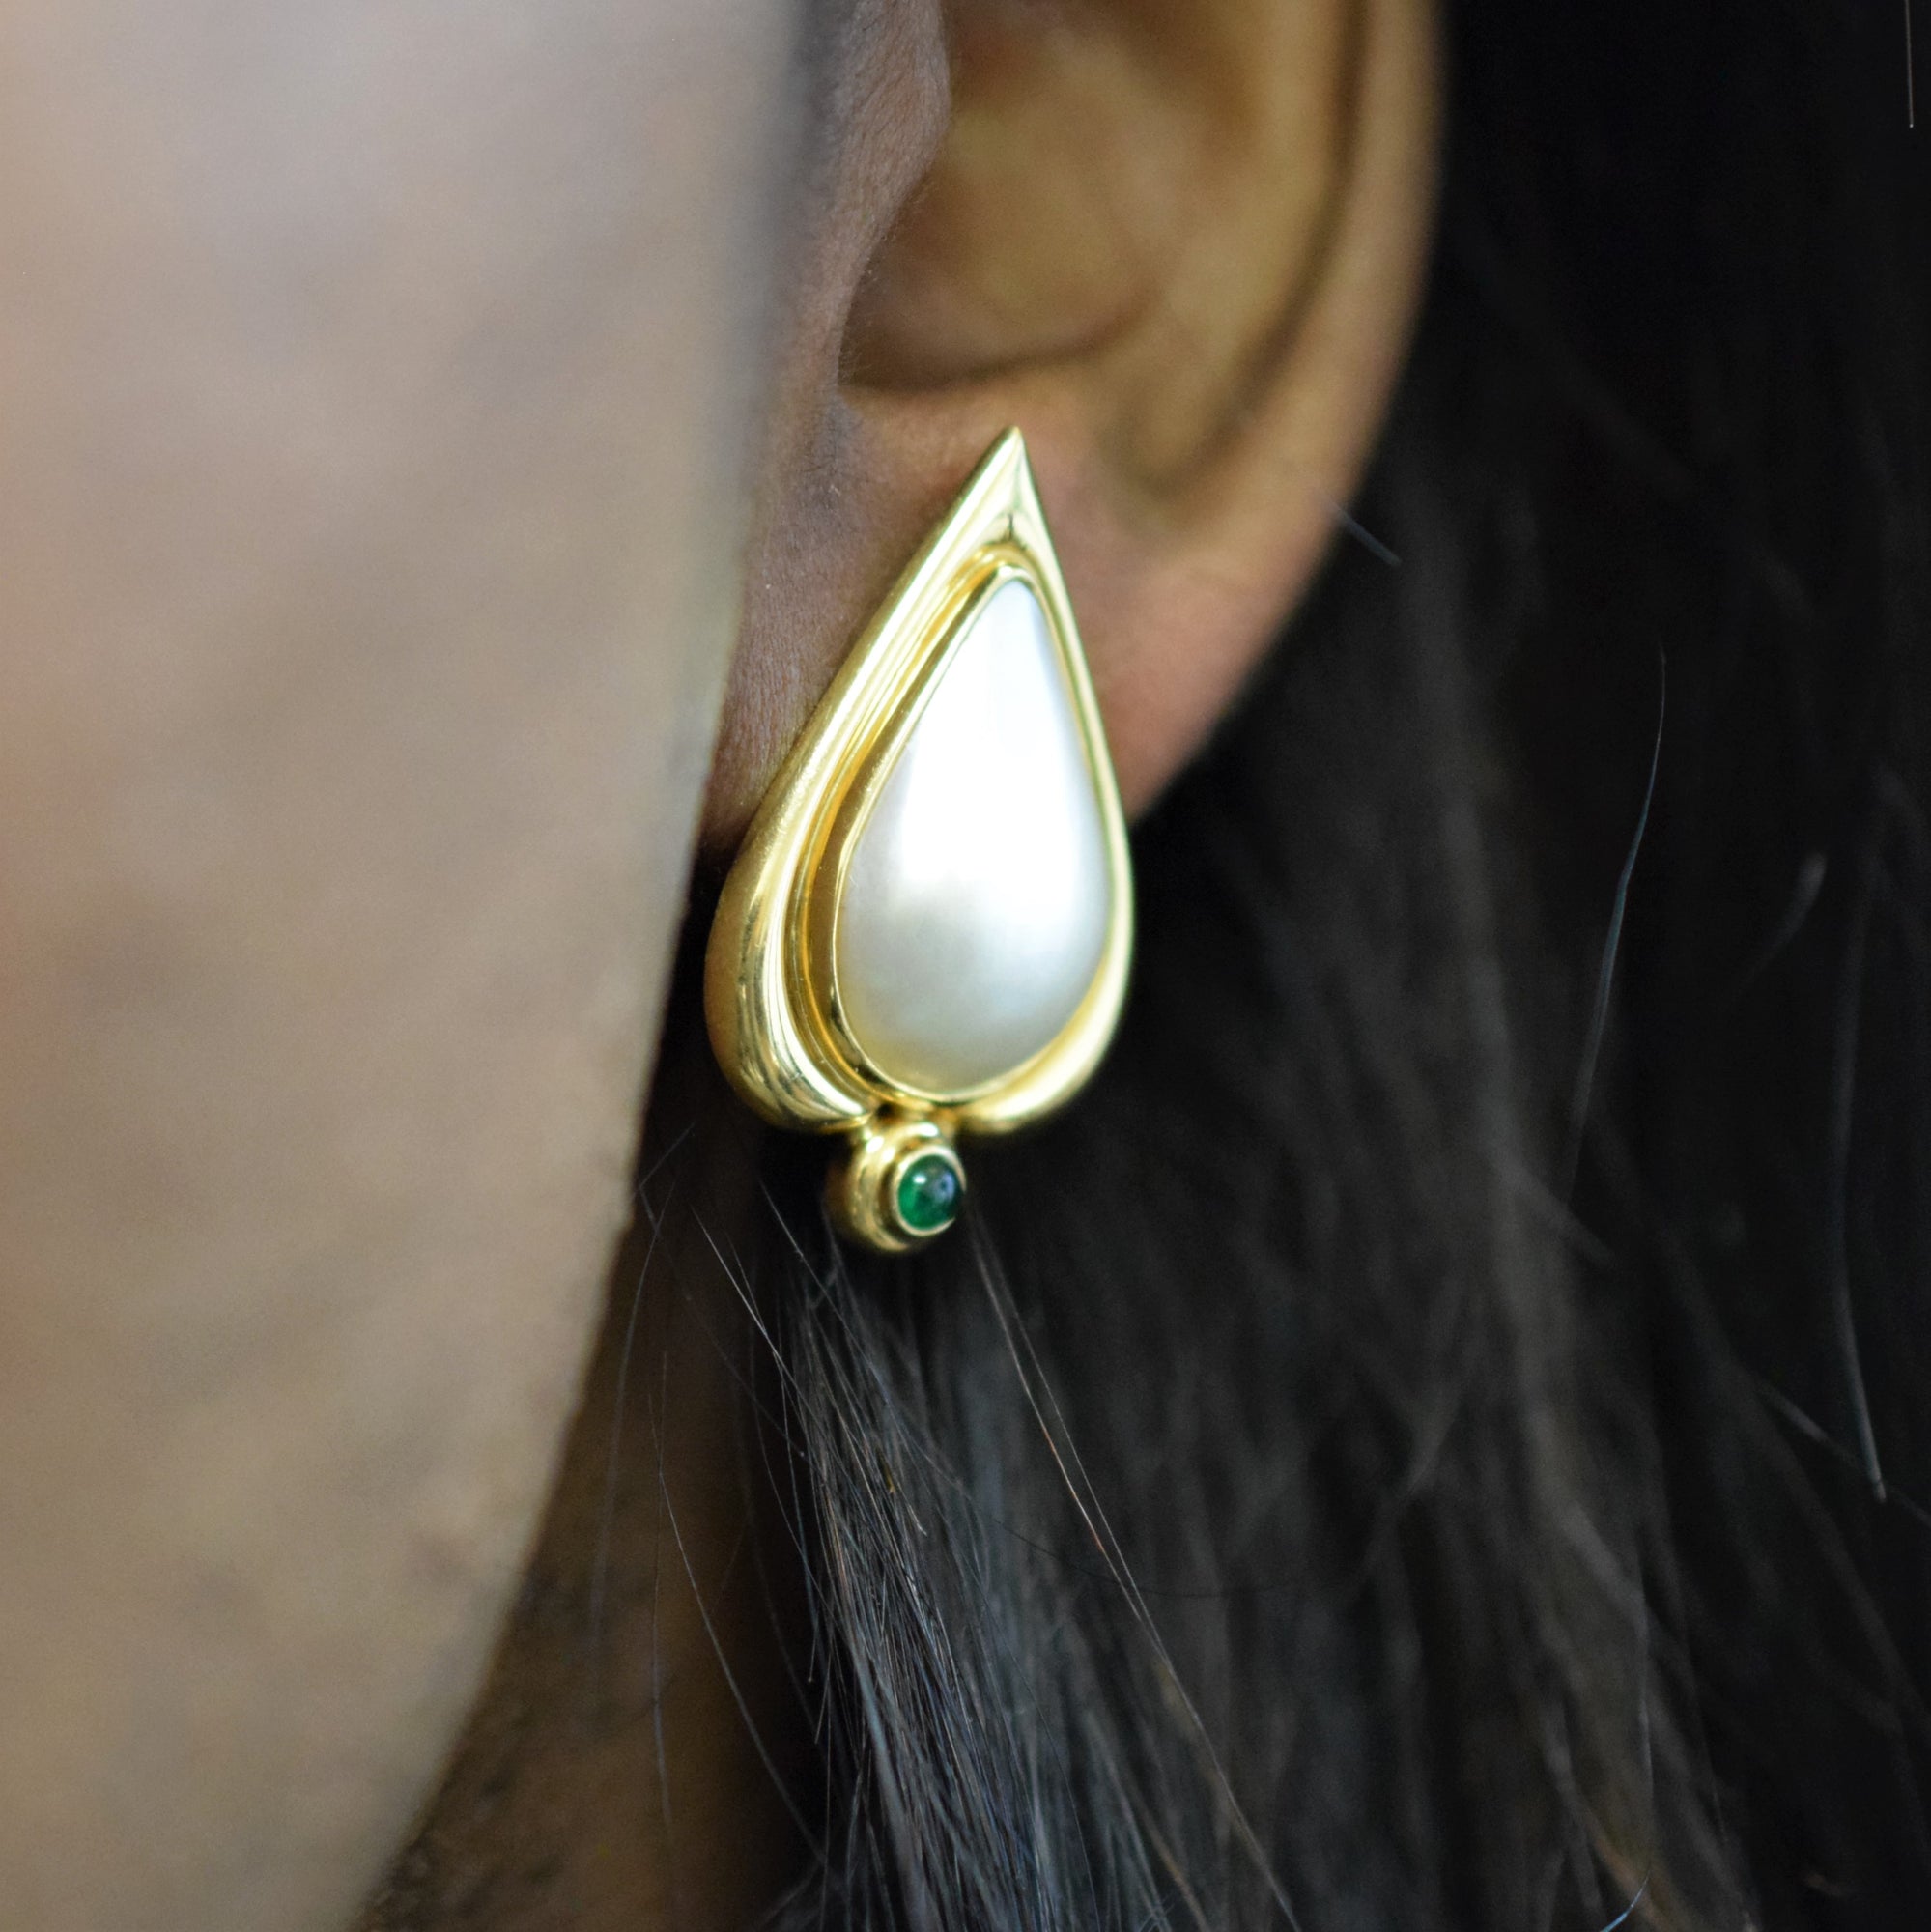 'Brinkhaus' Mabe Pearl & Emerald Earrings | 20.0ctw, 0.20ctw |